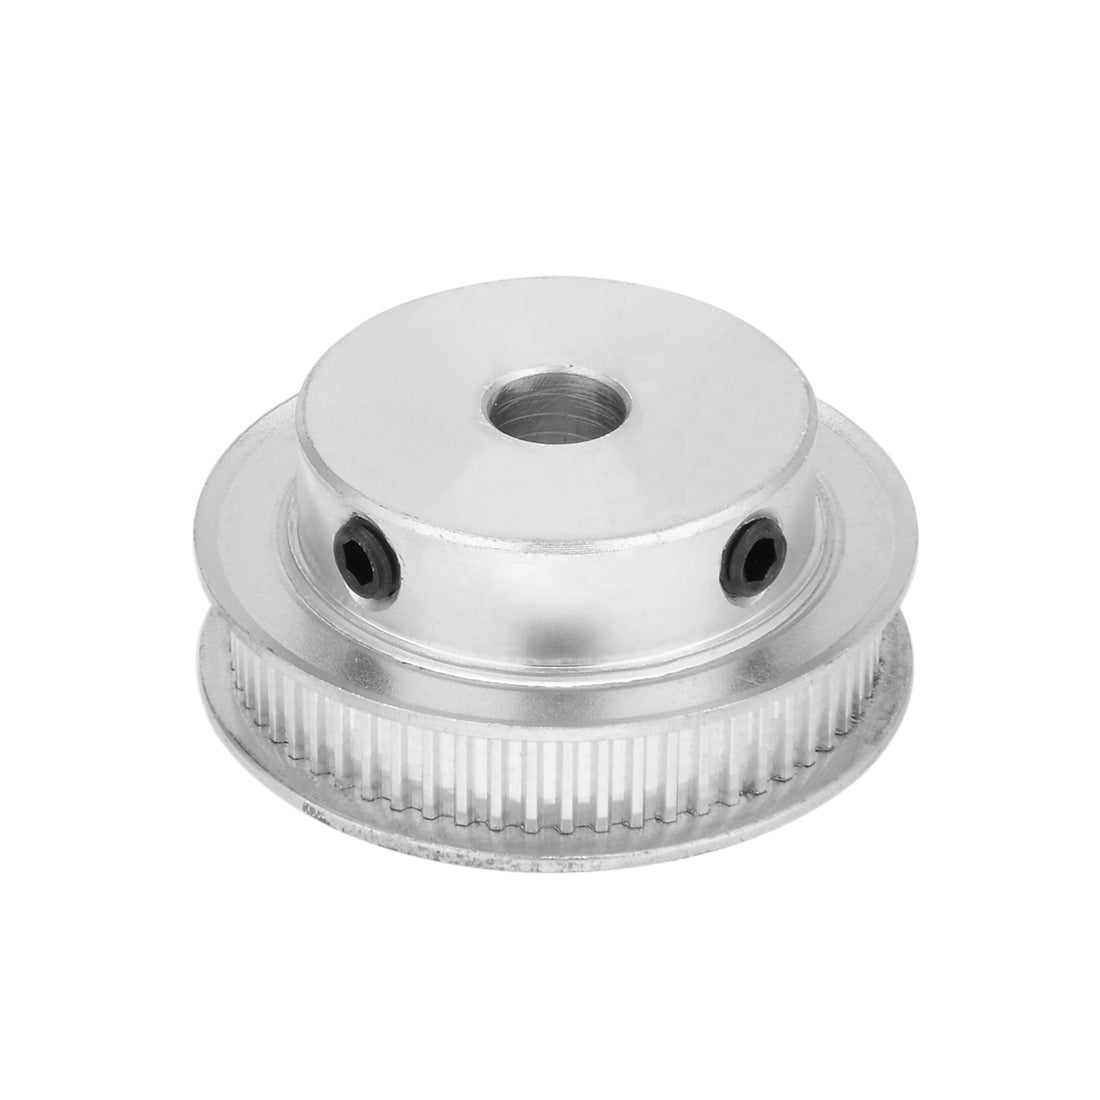 uxcell Uxcell Aluminum Timing Pulley MXL 60 Teeth mm Bore Timing Belt Pulley Synchronous Wheel for mm Belt